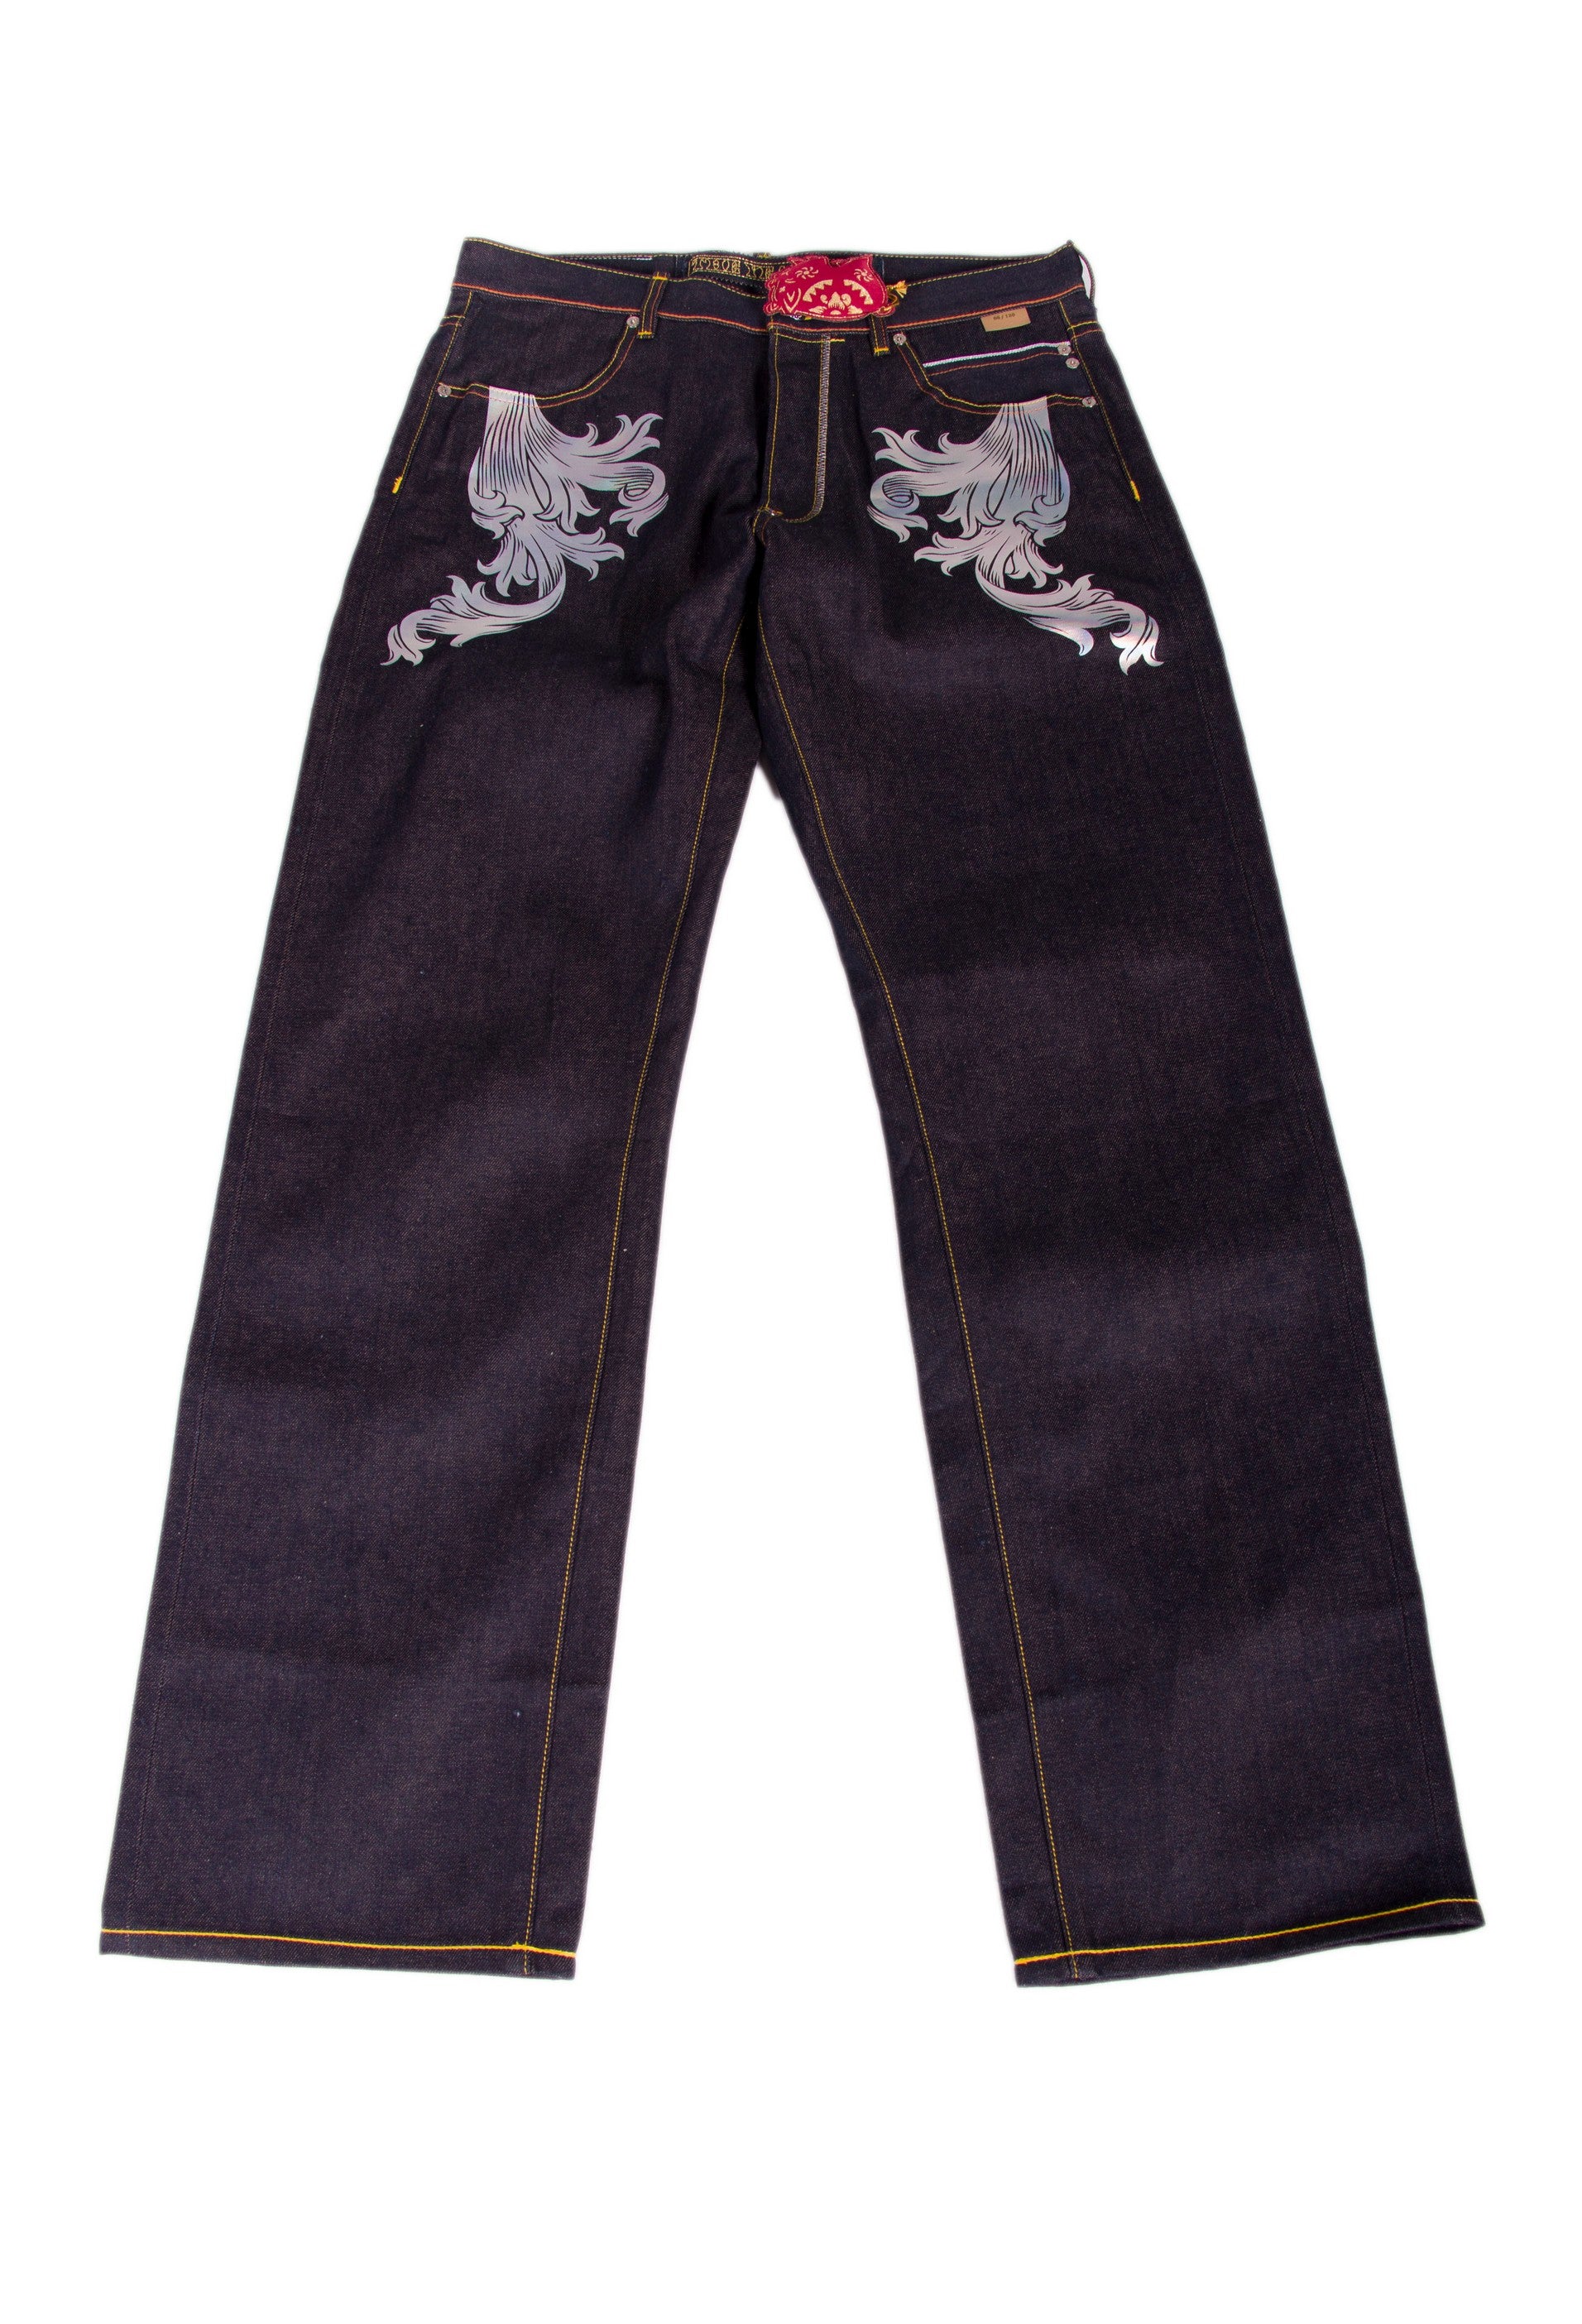 Year Of The 4 Vines Denim Jeans